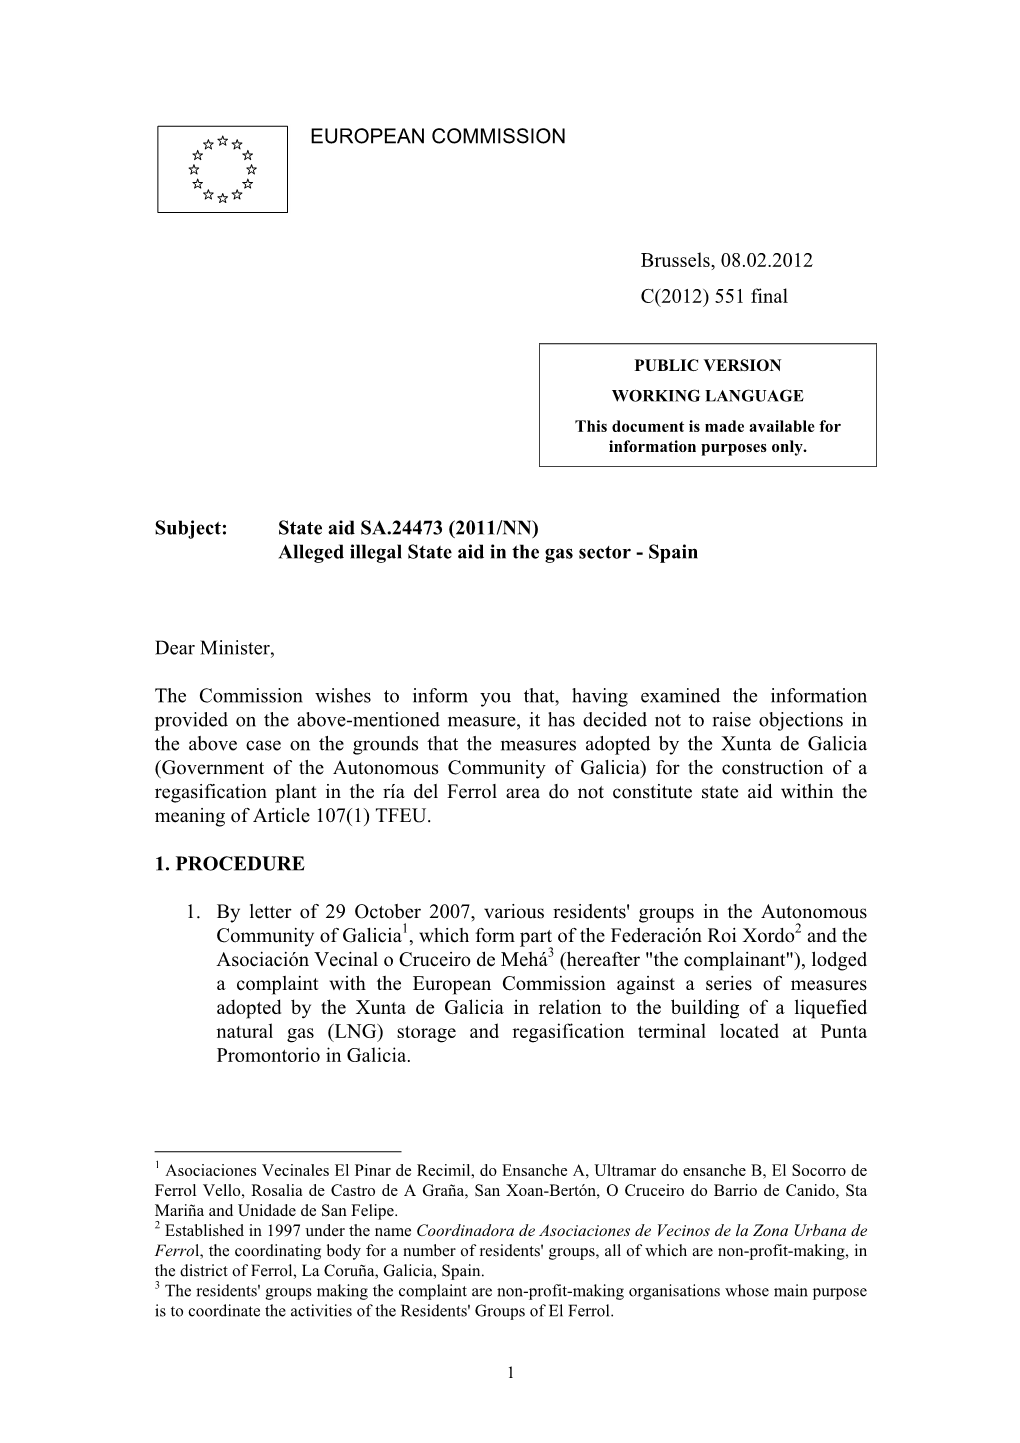 State Aid SA.24473 (2011/NN) Alleged Illegal State Aid in the Gas Sector - Spain